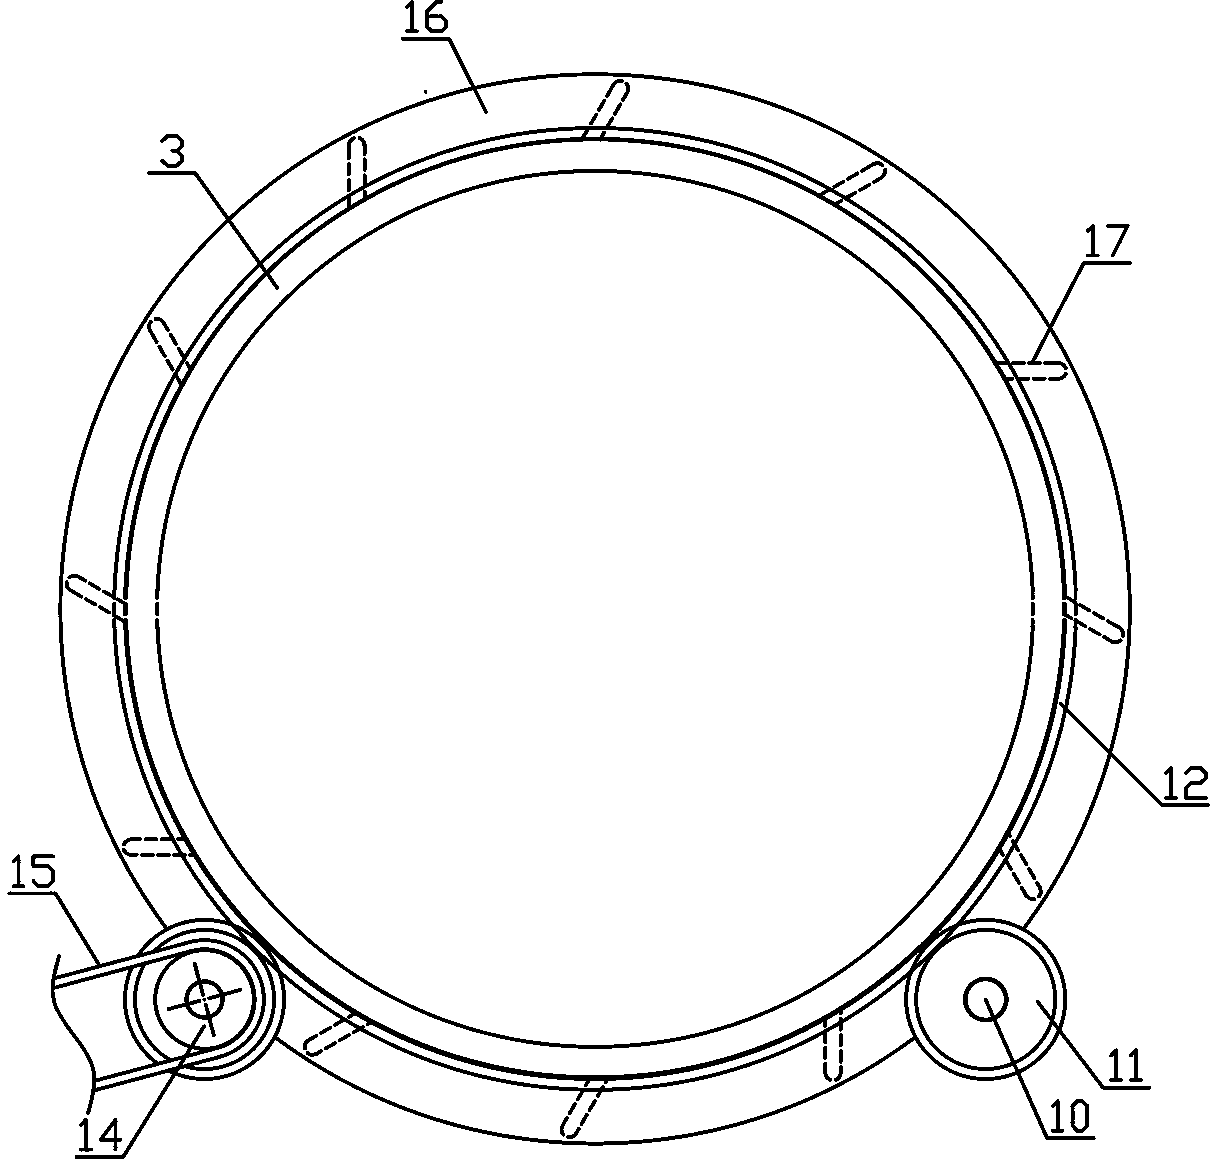 Dust removing and material conveying mechanism for woolen materials